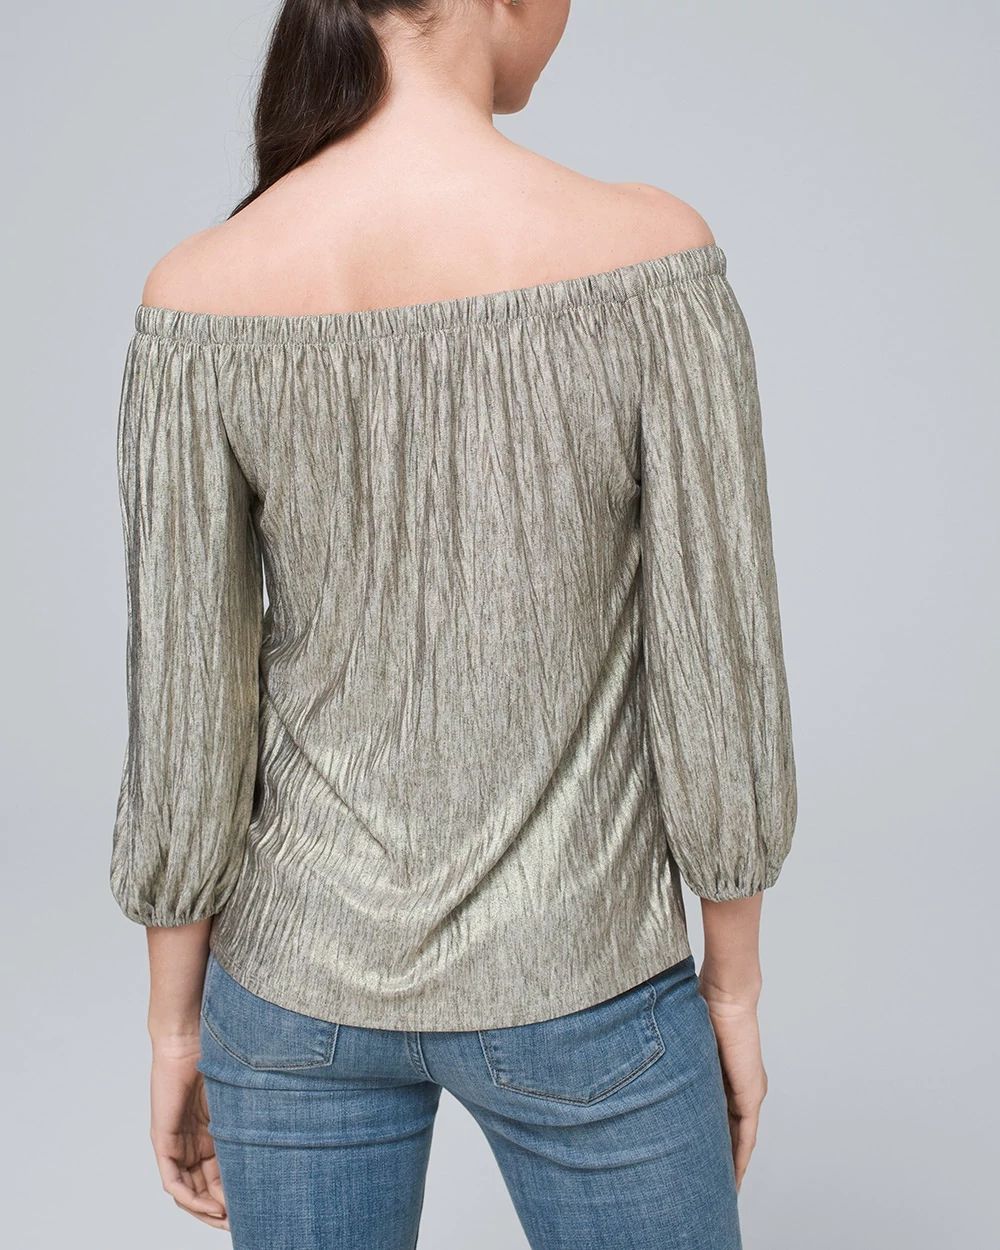 Metallic Off-The-Shoulder Top click to view larger image.